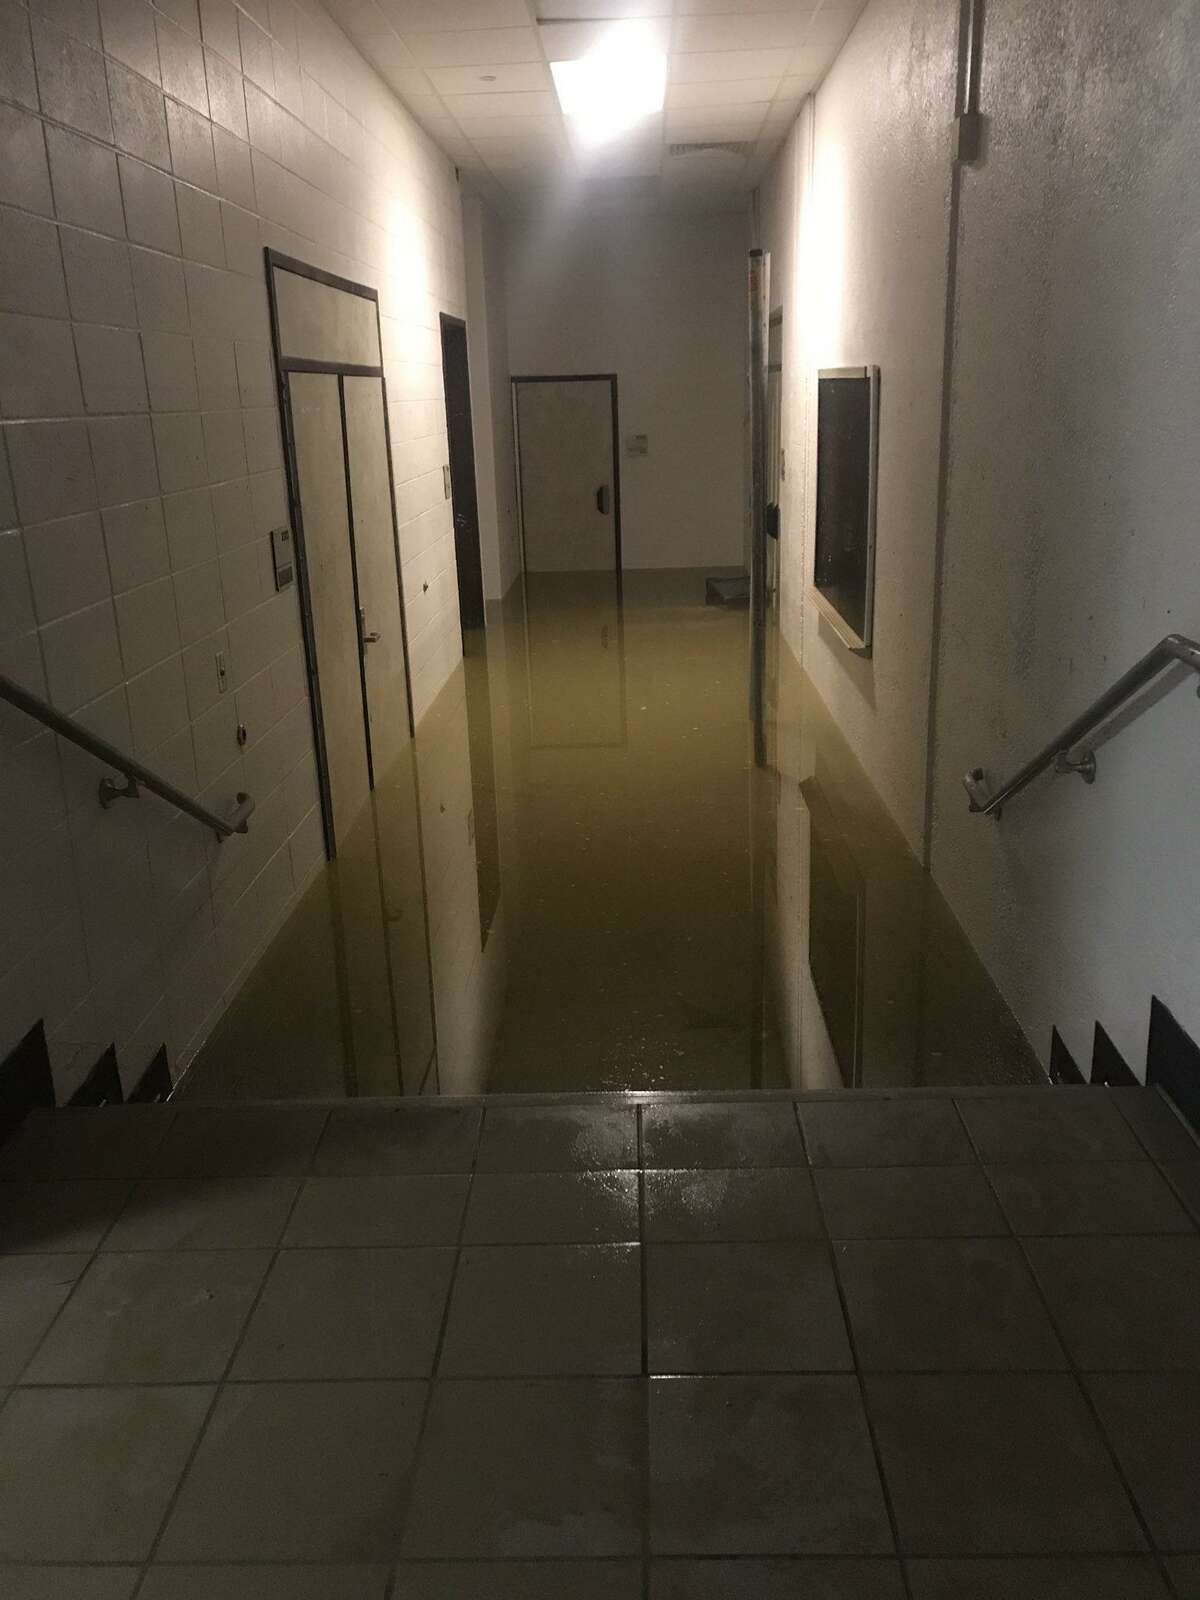 This photo posted by Humble ISD Superintendent Elizabeth Fagen shows a hallway at Kingwood High School inundated with several feet of flooding as a result of Tropical Storm Harvey.